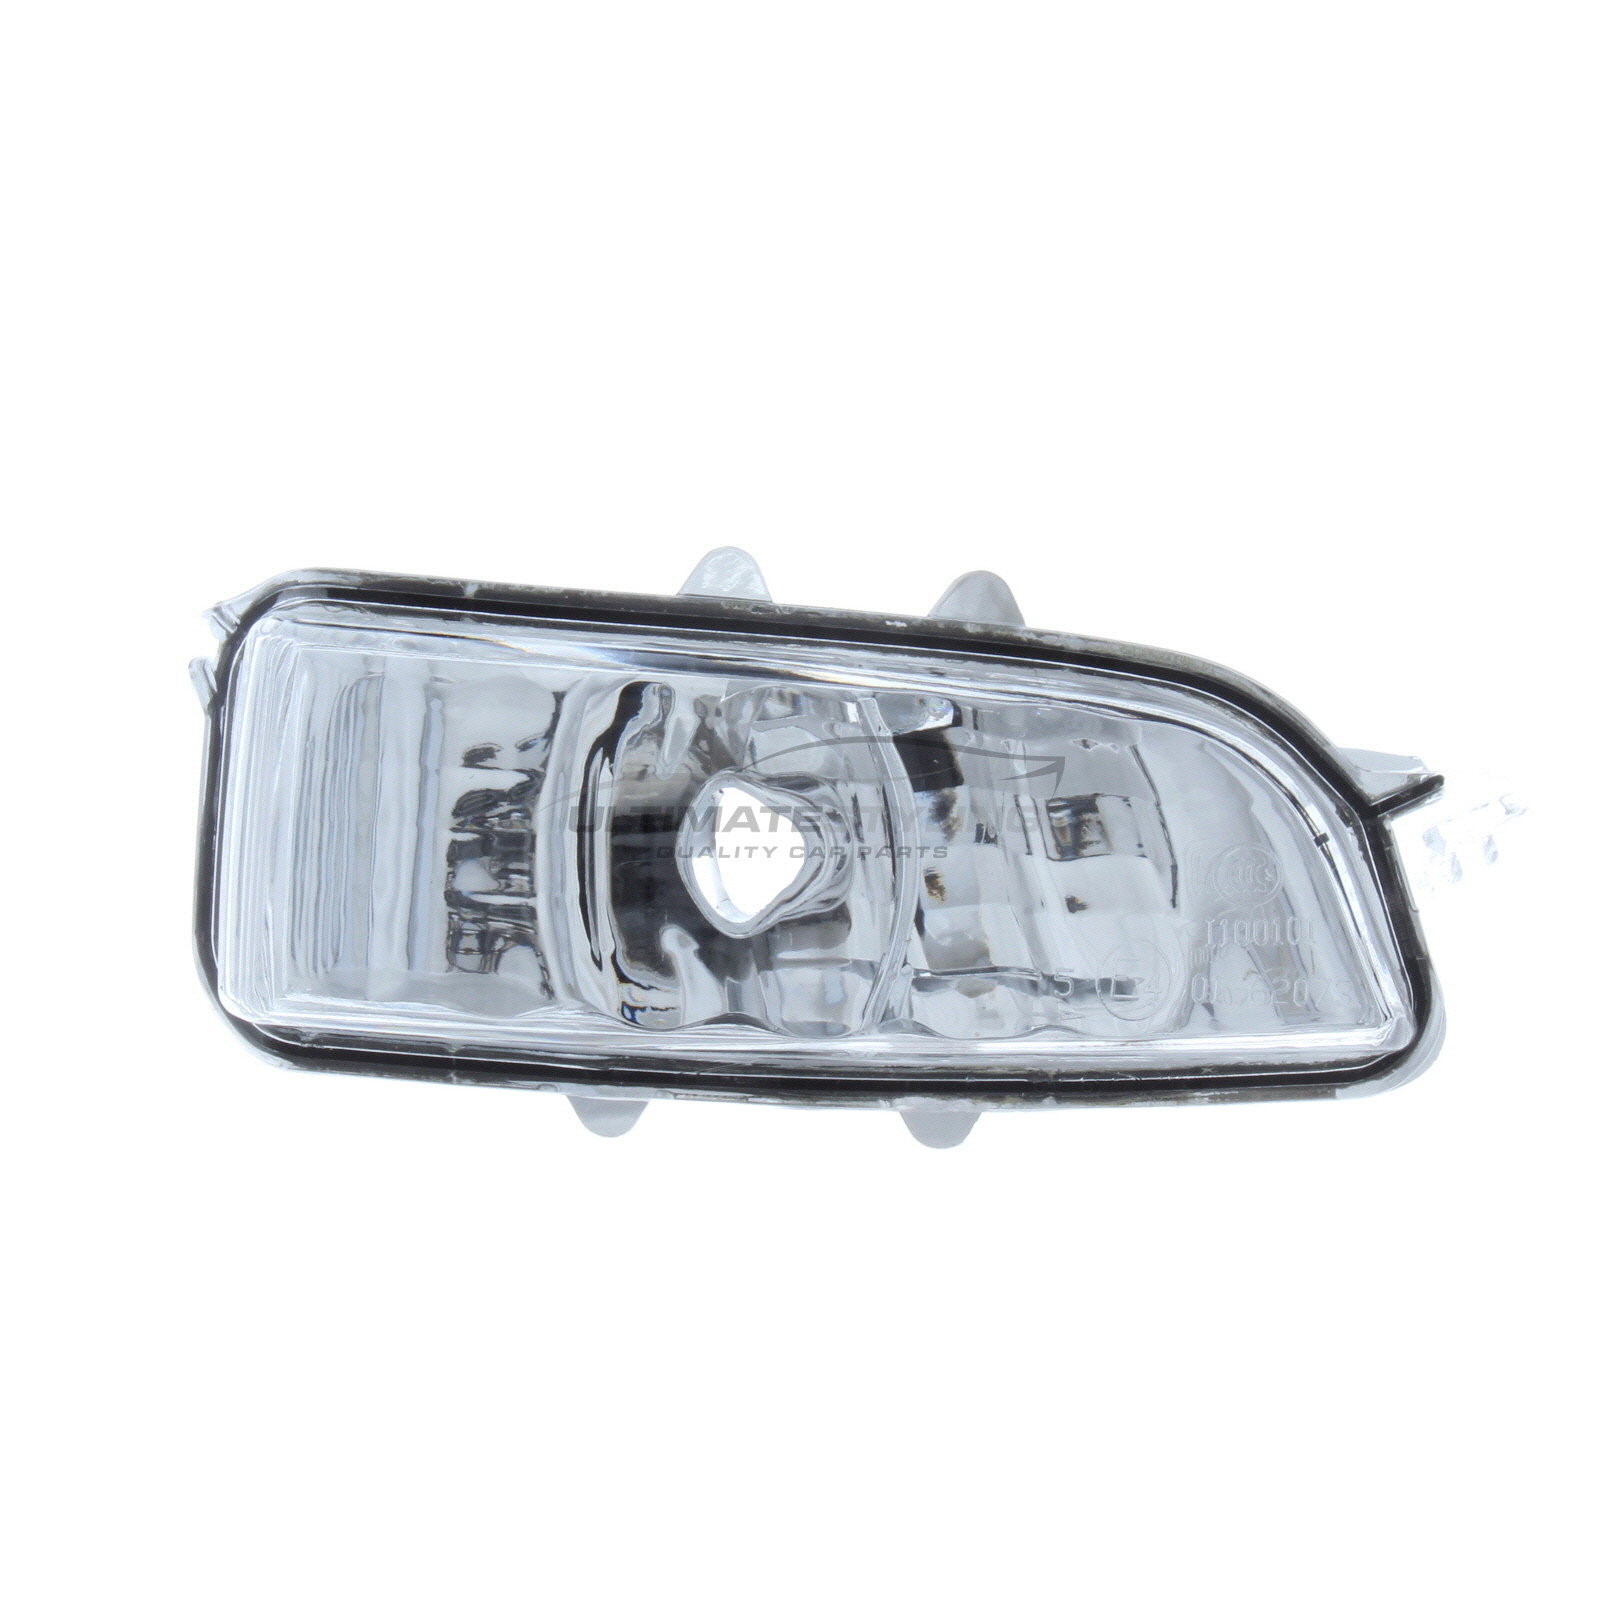 Volvo C30 2006-2014, Volvo C70 2007-2014, Volvo S40 2007-2013, Volvo S60 2006-2010, Volvo S80 2006-2011, Volvo V50 2007-2013, Volvo V70 2006-2011 Clear Non-LED (WY5W) Mirror Indicator Drivers Side (RH)